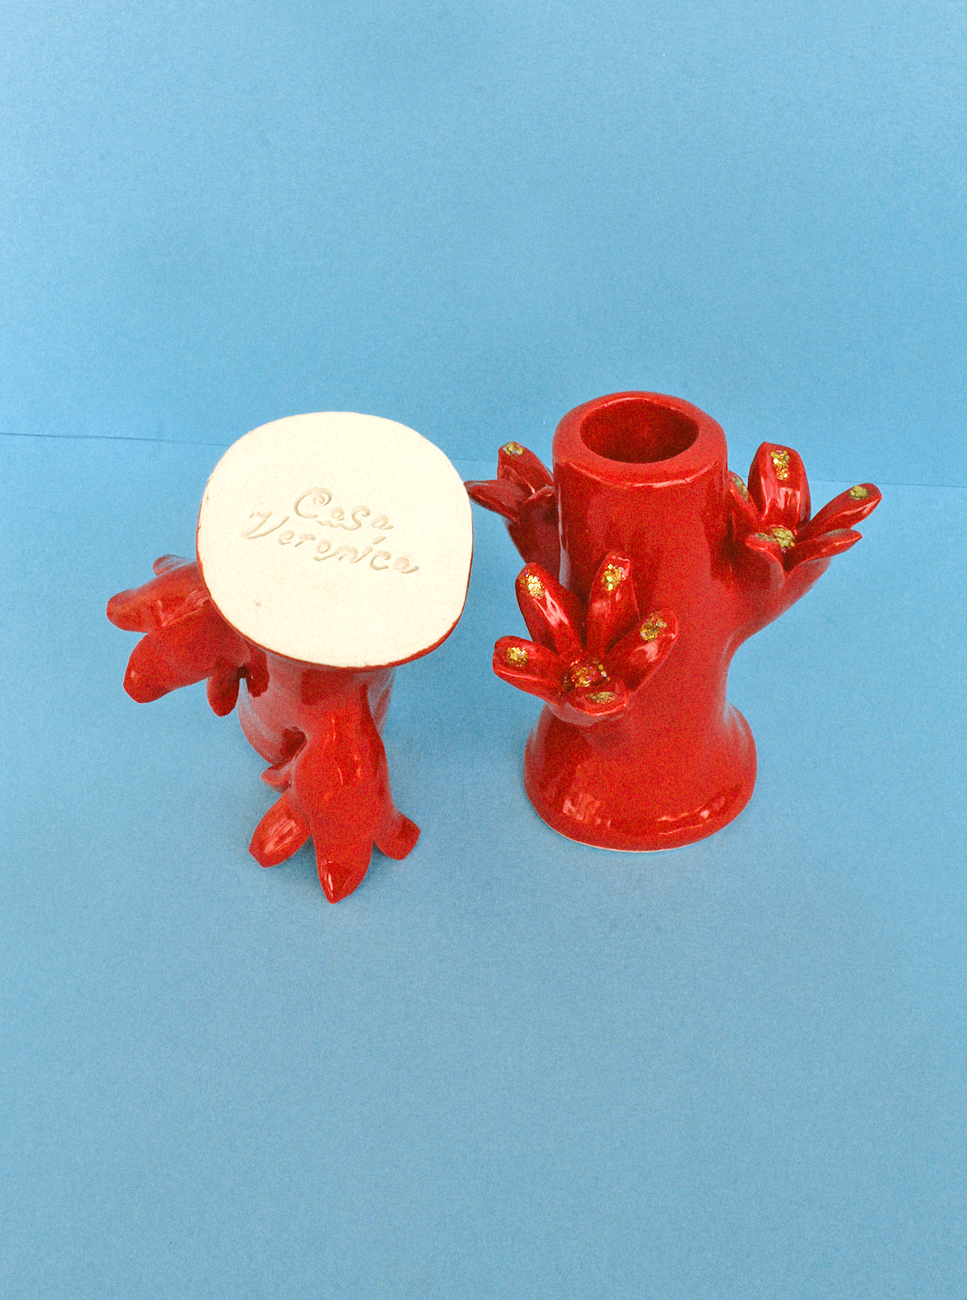 Two Flores Candleholder Set - Rojo designed with frog legs and golden accents on a blue background, one with a lid labeled "Casa Veronica.